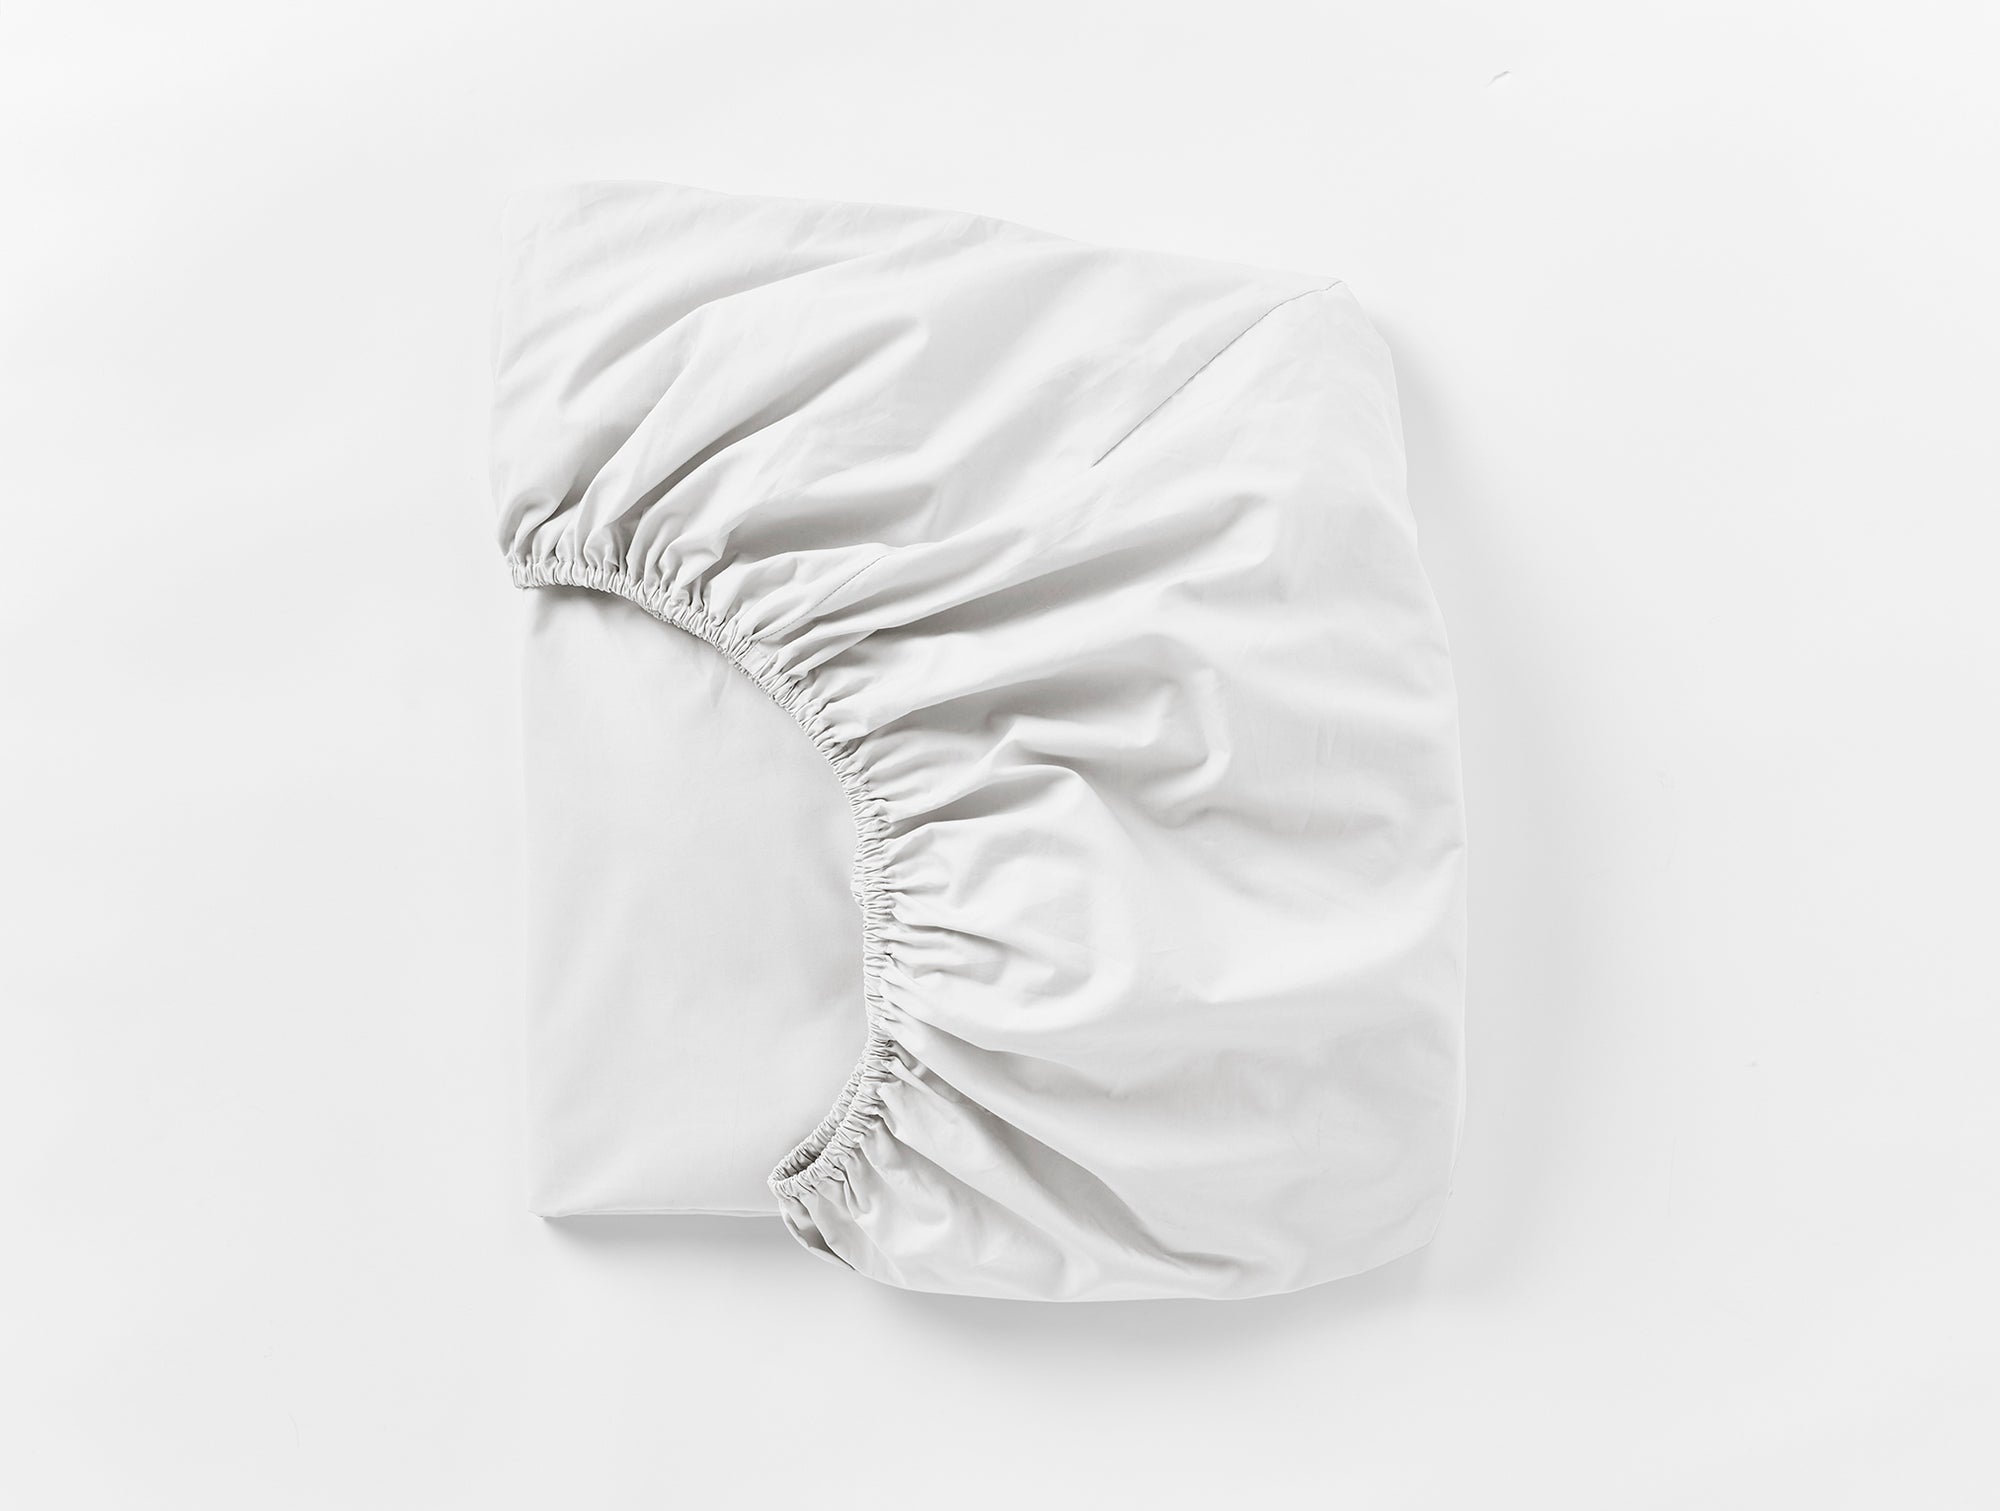 300 TC Organic Percale Fitted Sheet in Twin XL